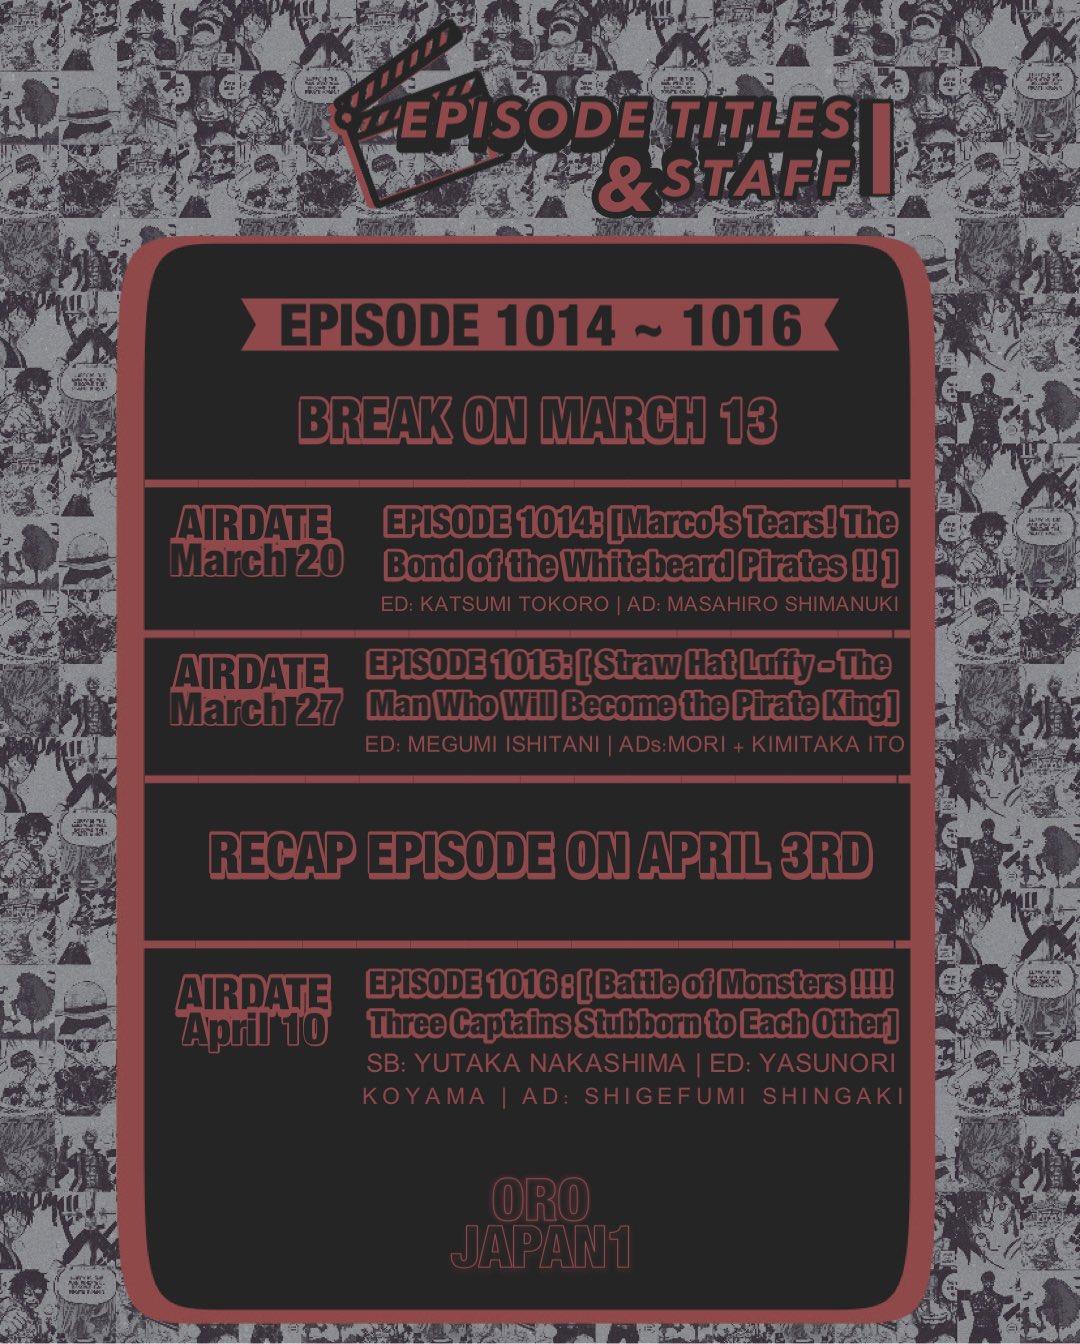 Orojapan Onepiece Episode Titles Staff 1014 1016 T Co Aecm4nbqwo Twitter